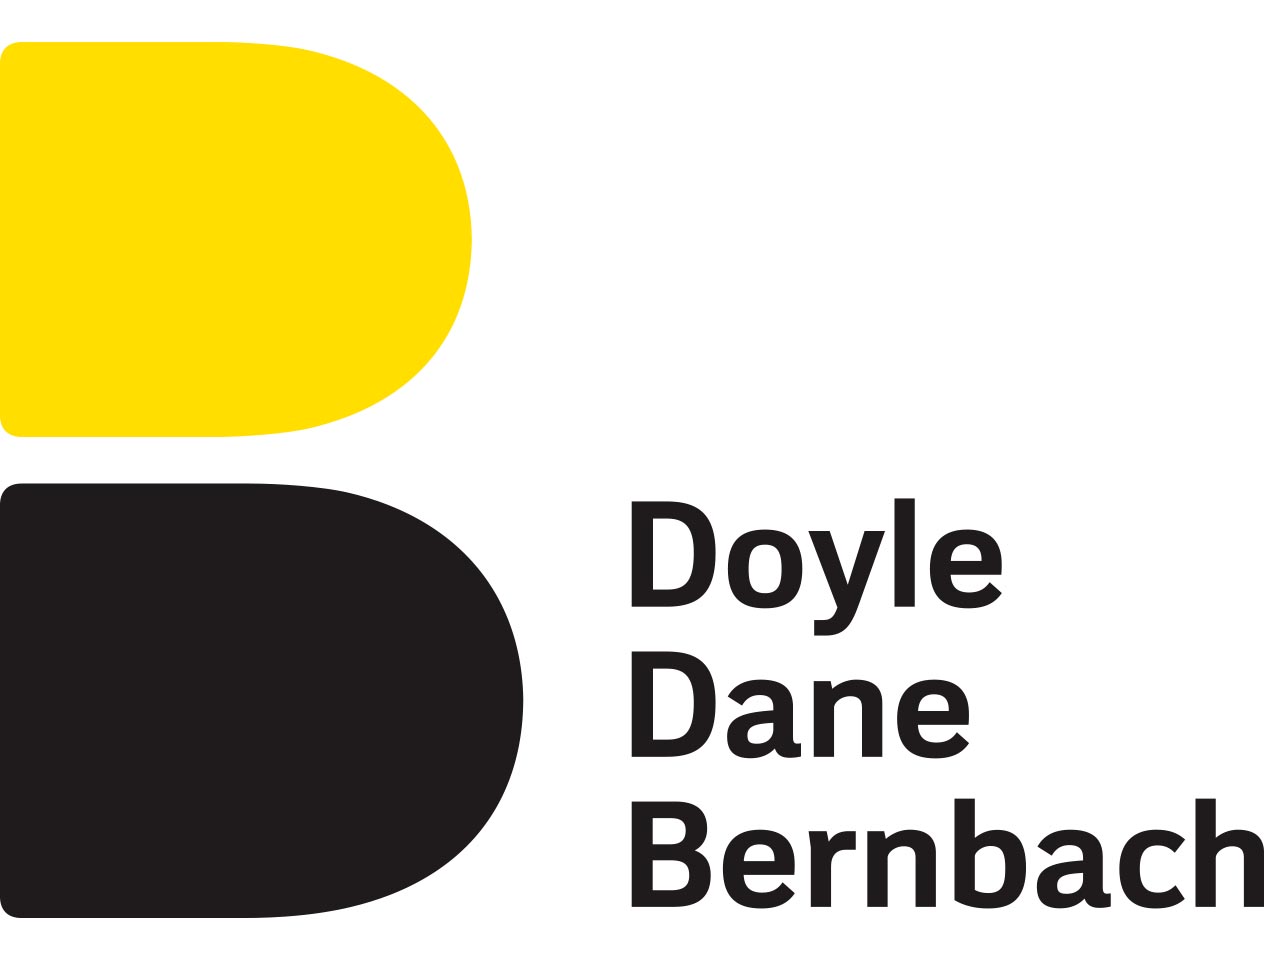 DDB Dubai integrates its operations with other Omnicom Group of companies